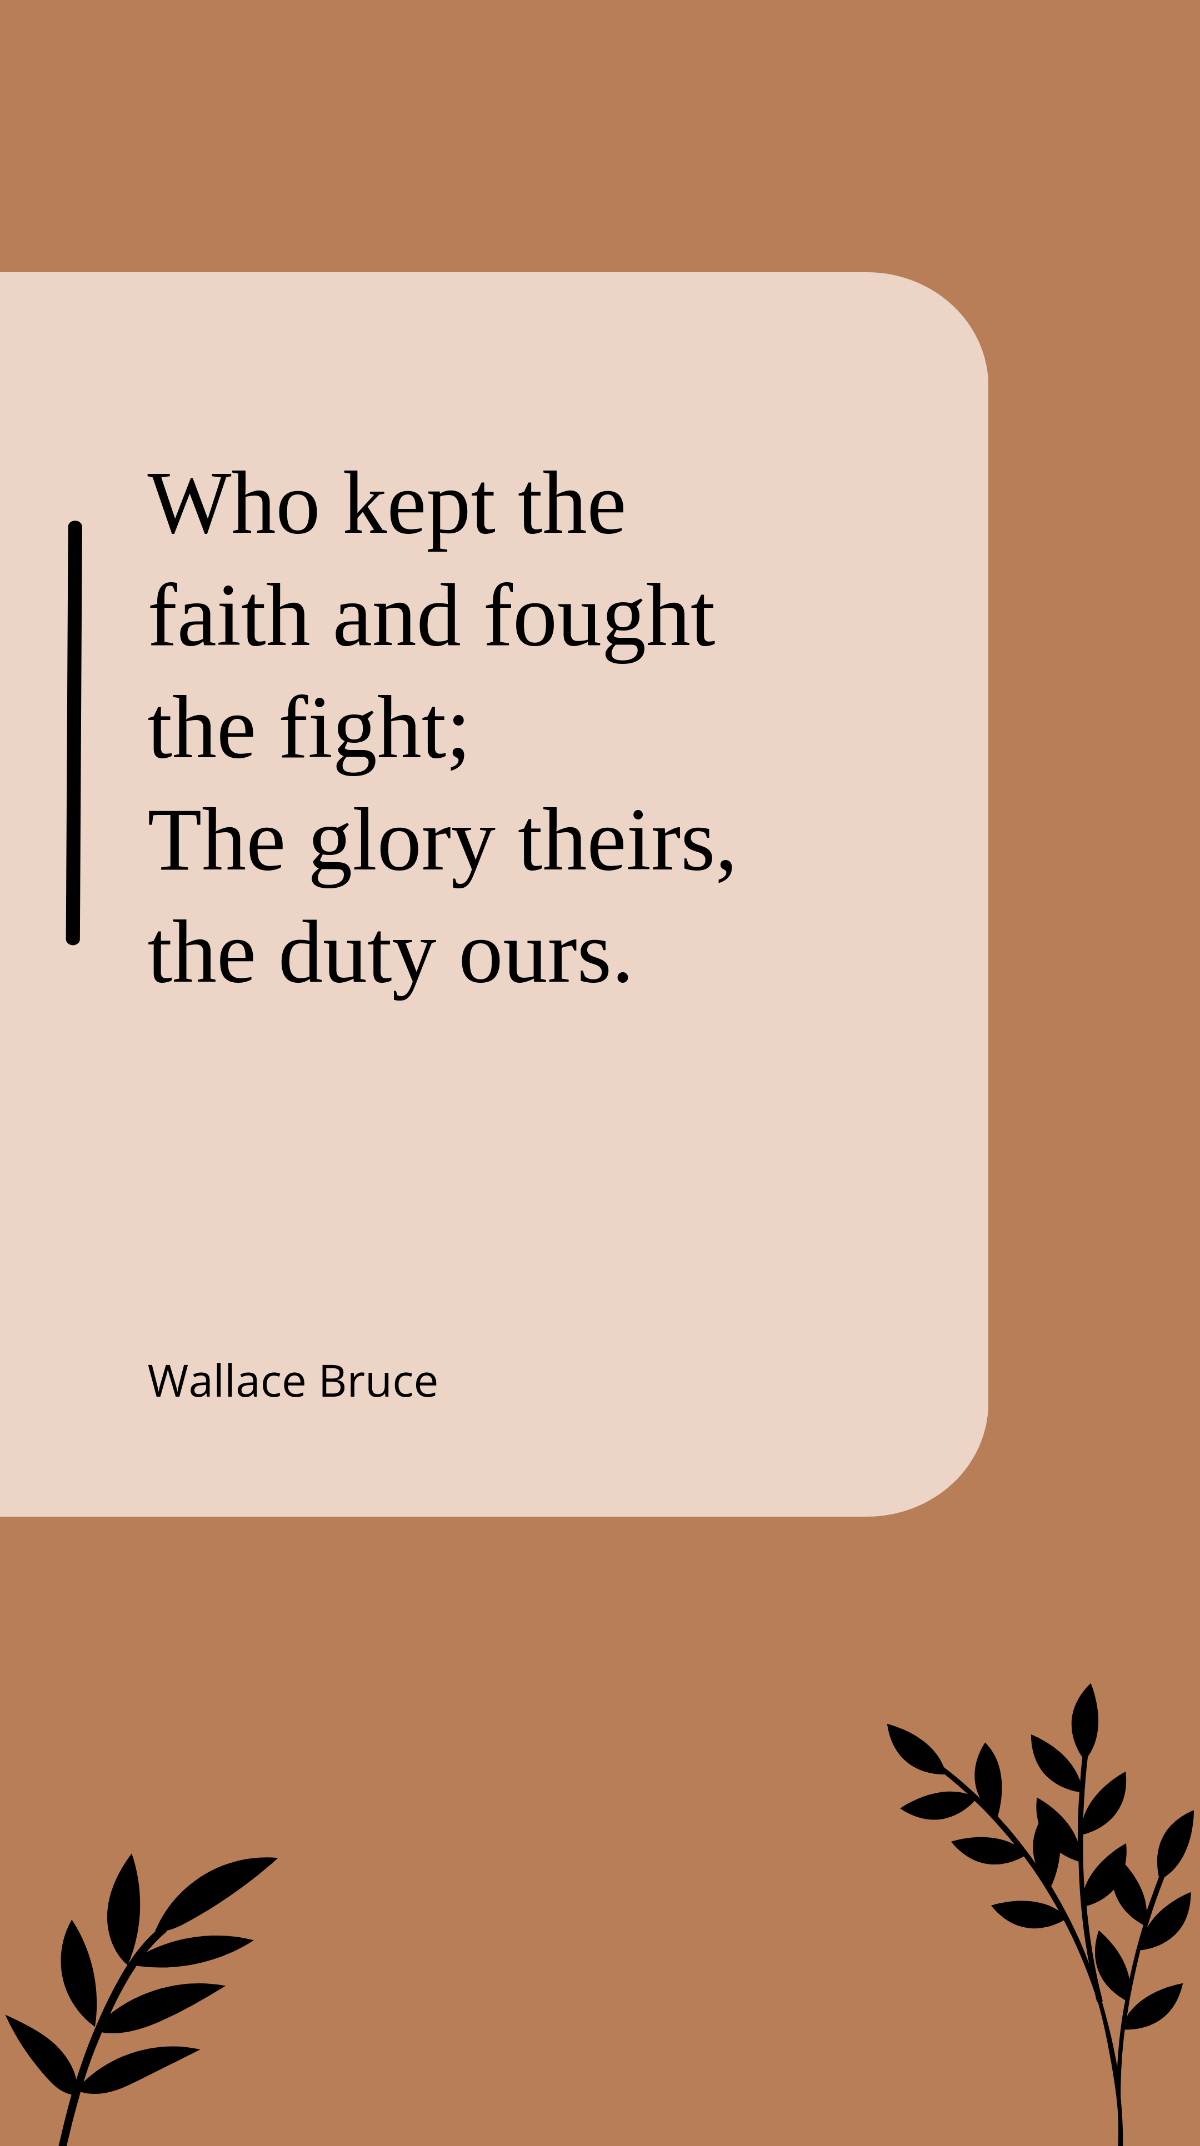 Wallace Bruce - "Who kept the faith and fought the fight; The glory theirs, the duty ours.”